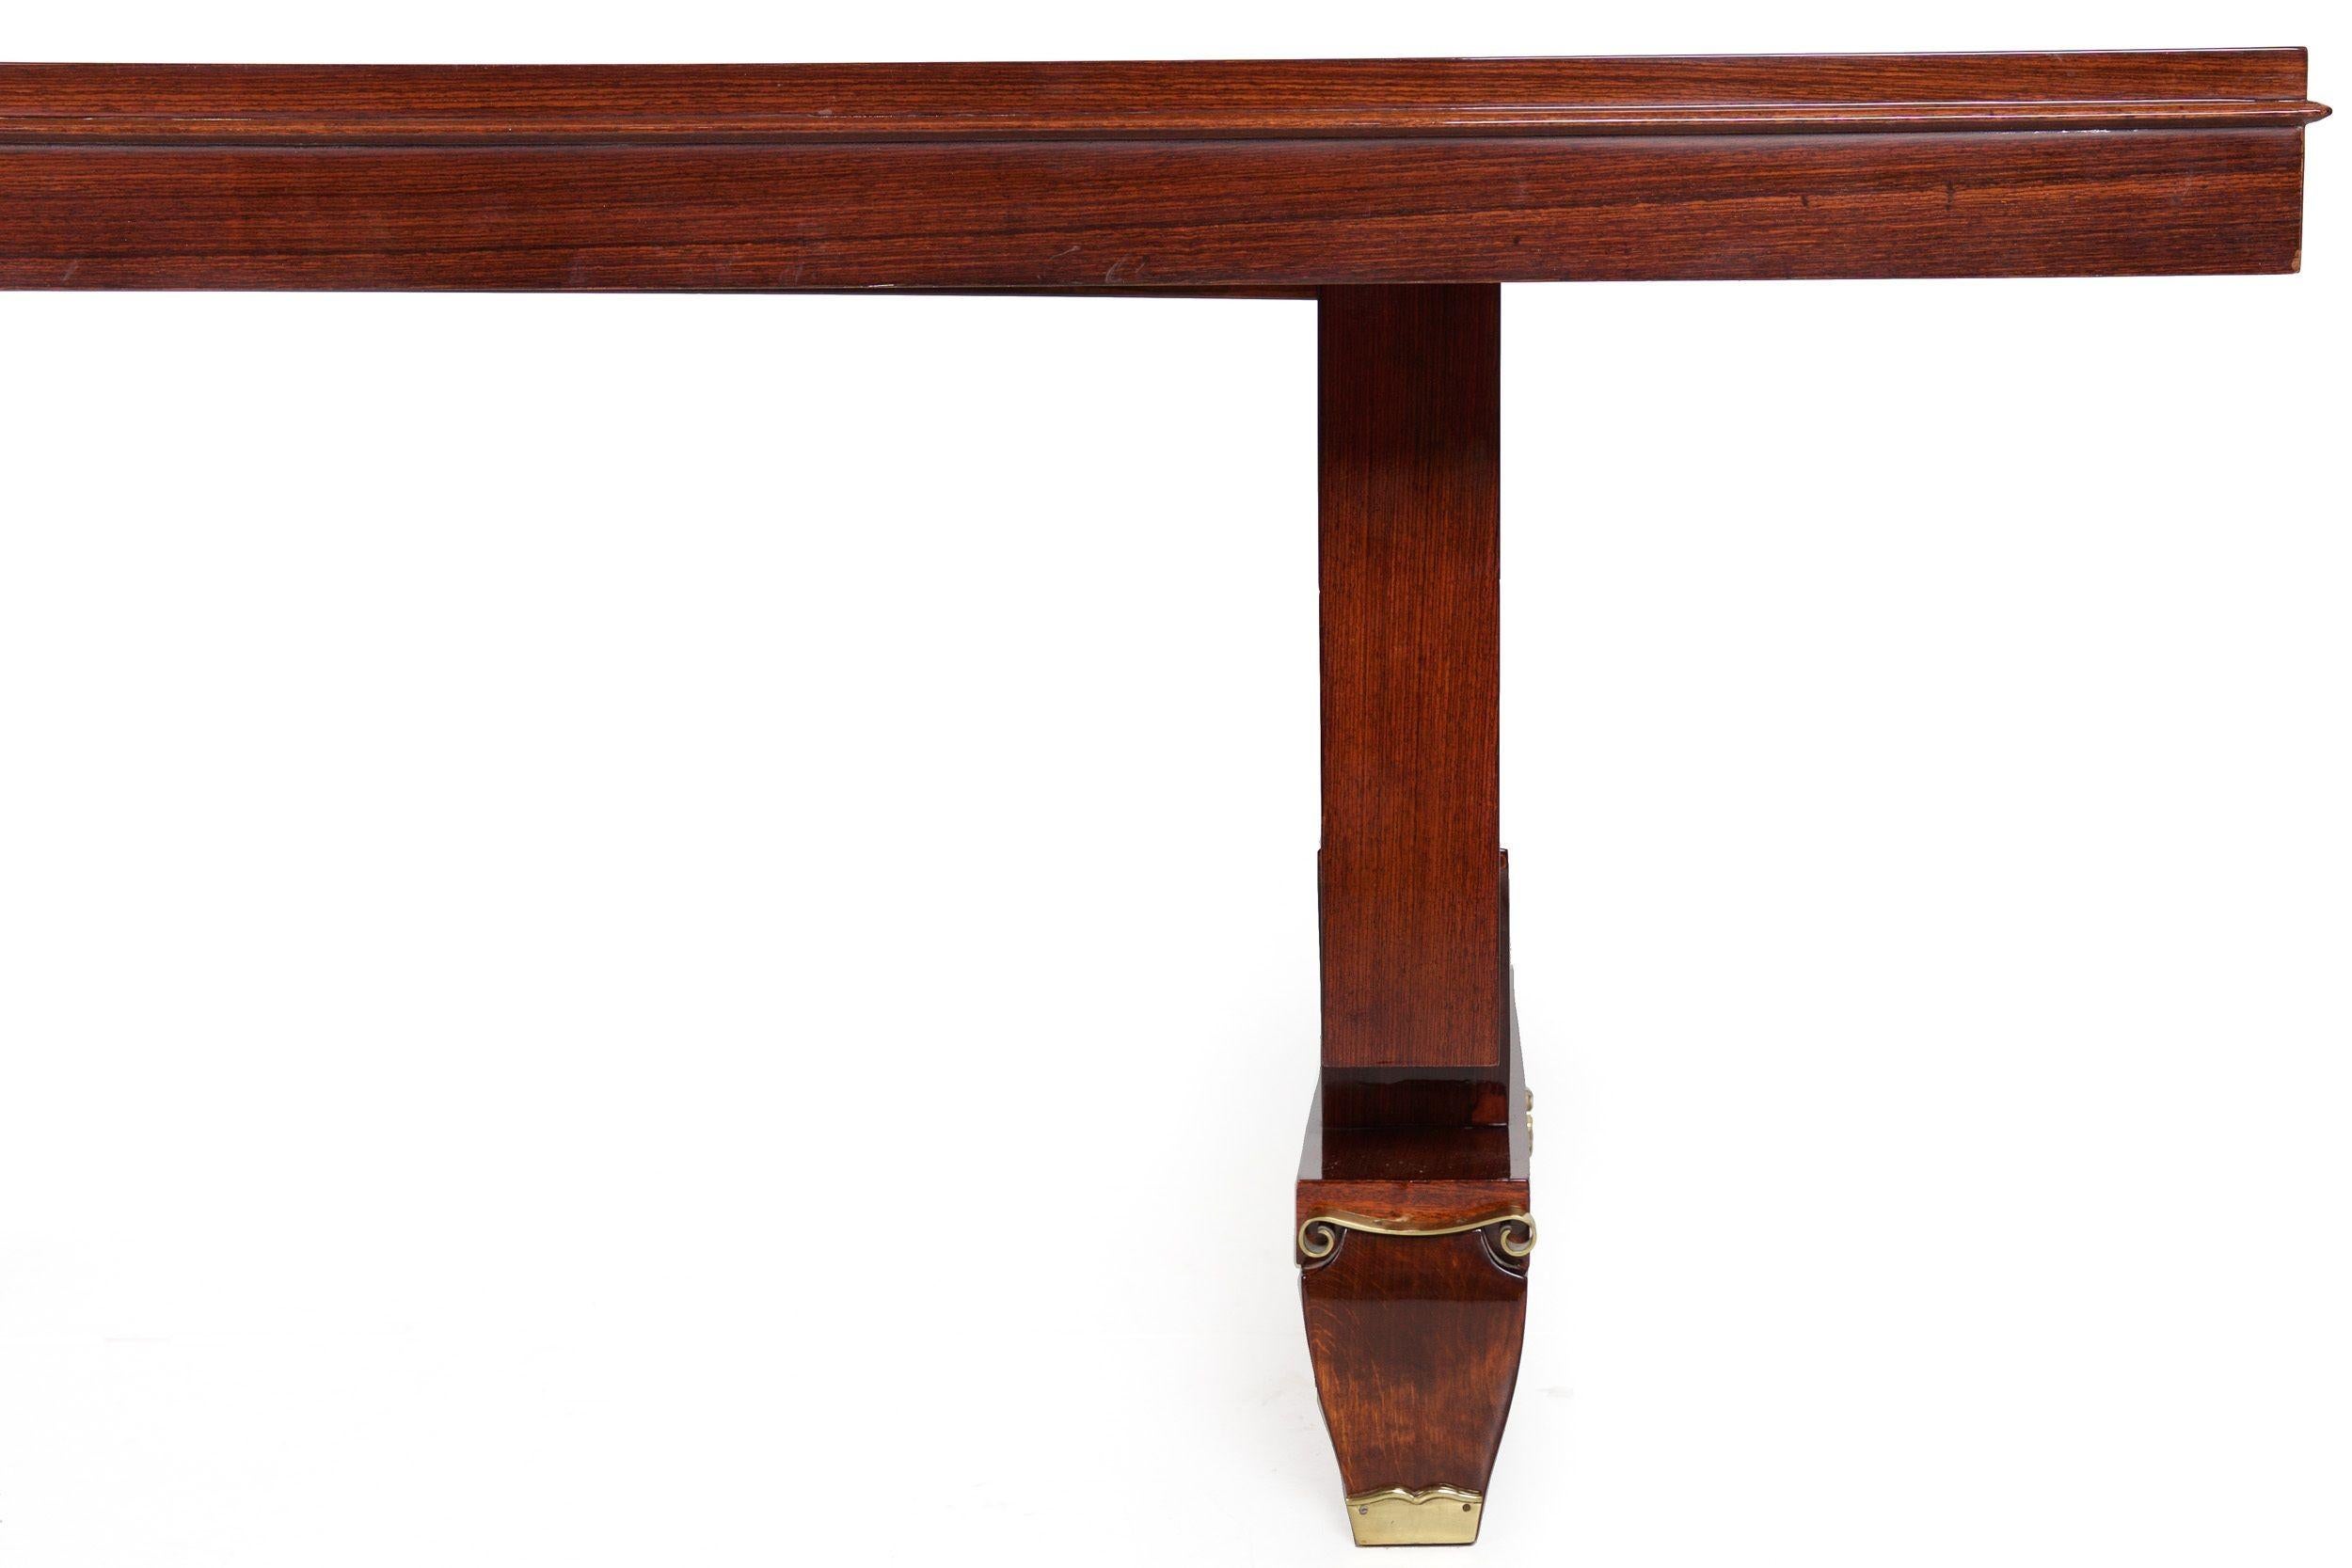 French Art Deco Inlaid Mother-of-Pearl Rosewood Dining Table, circa 1940s For Sale 2